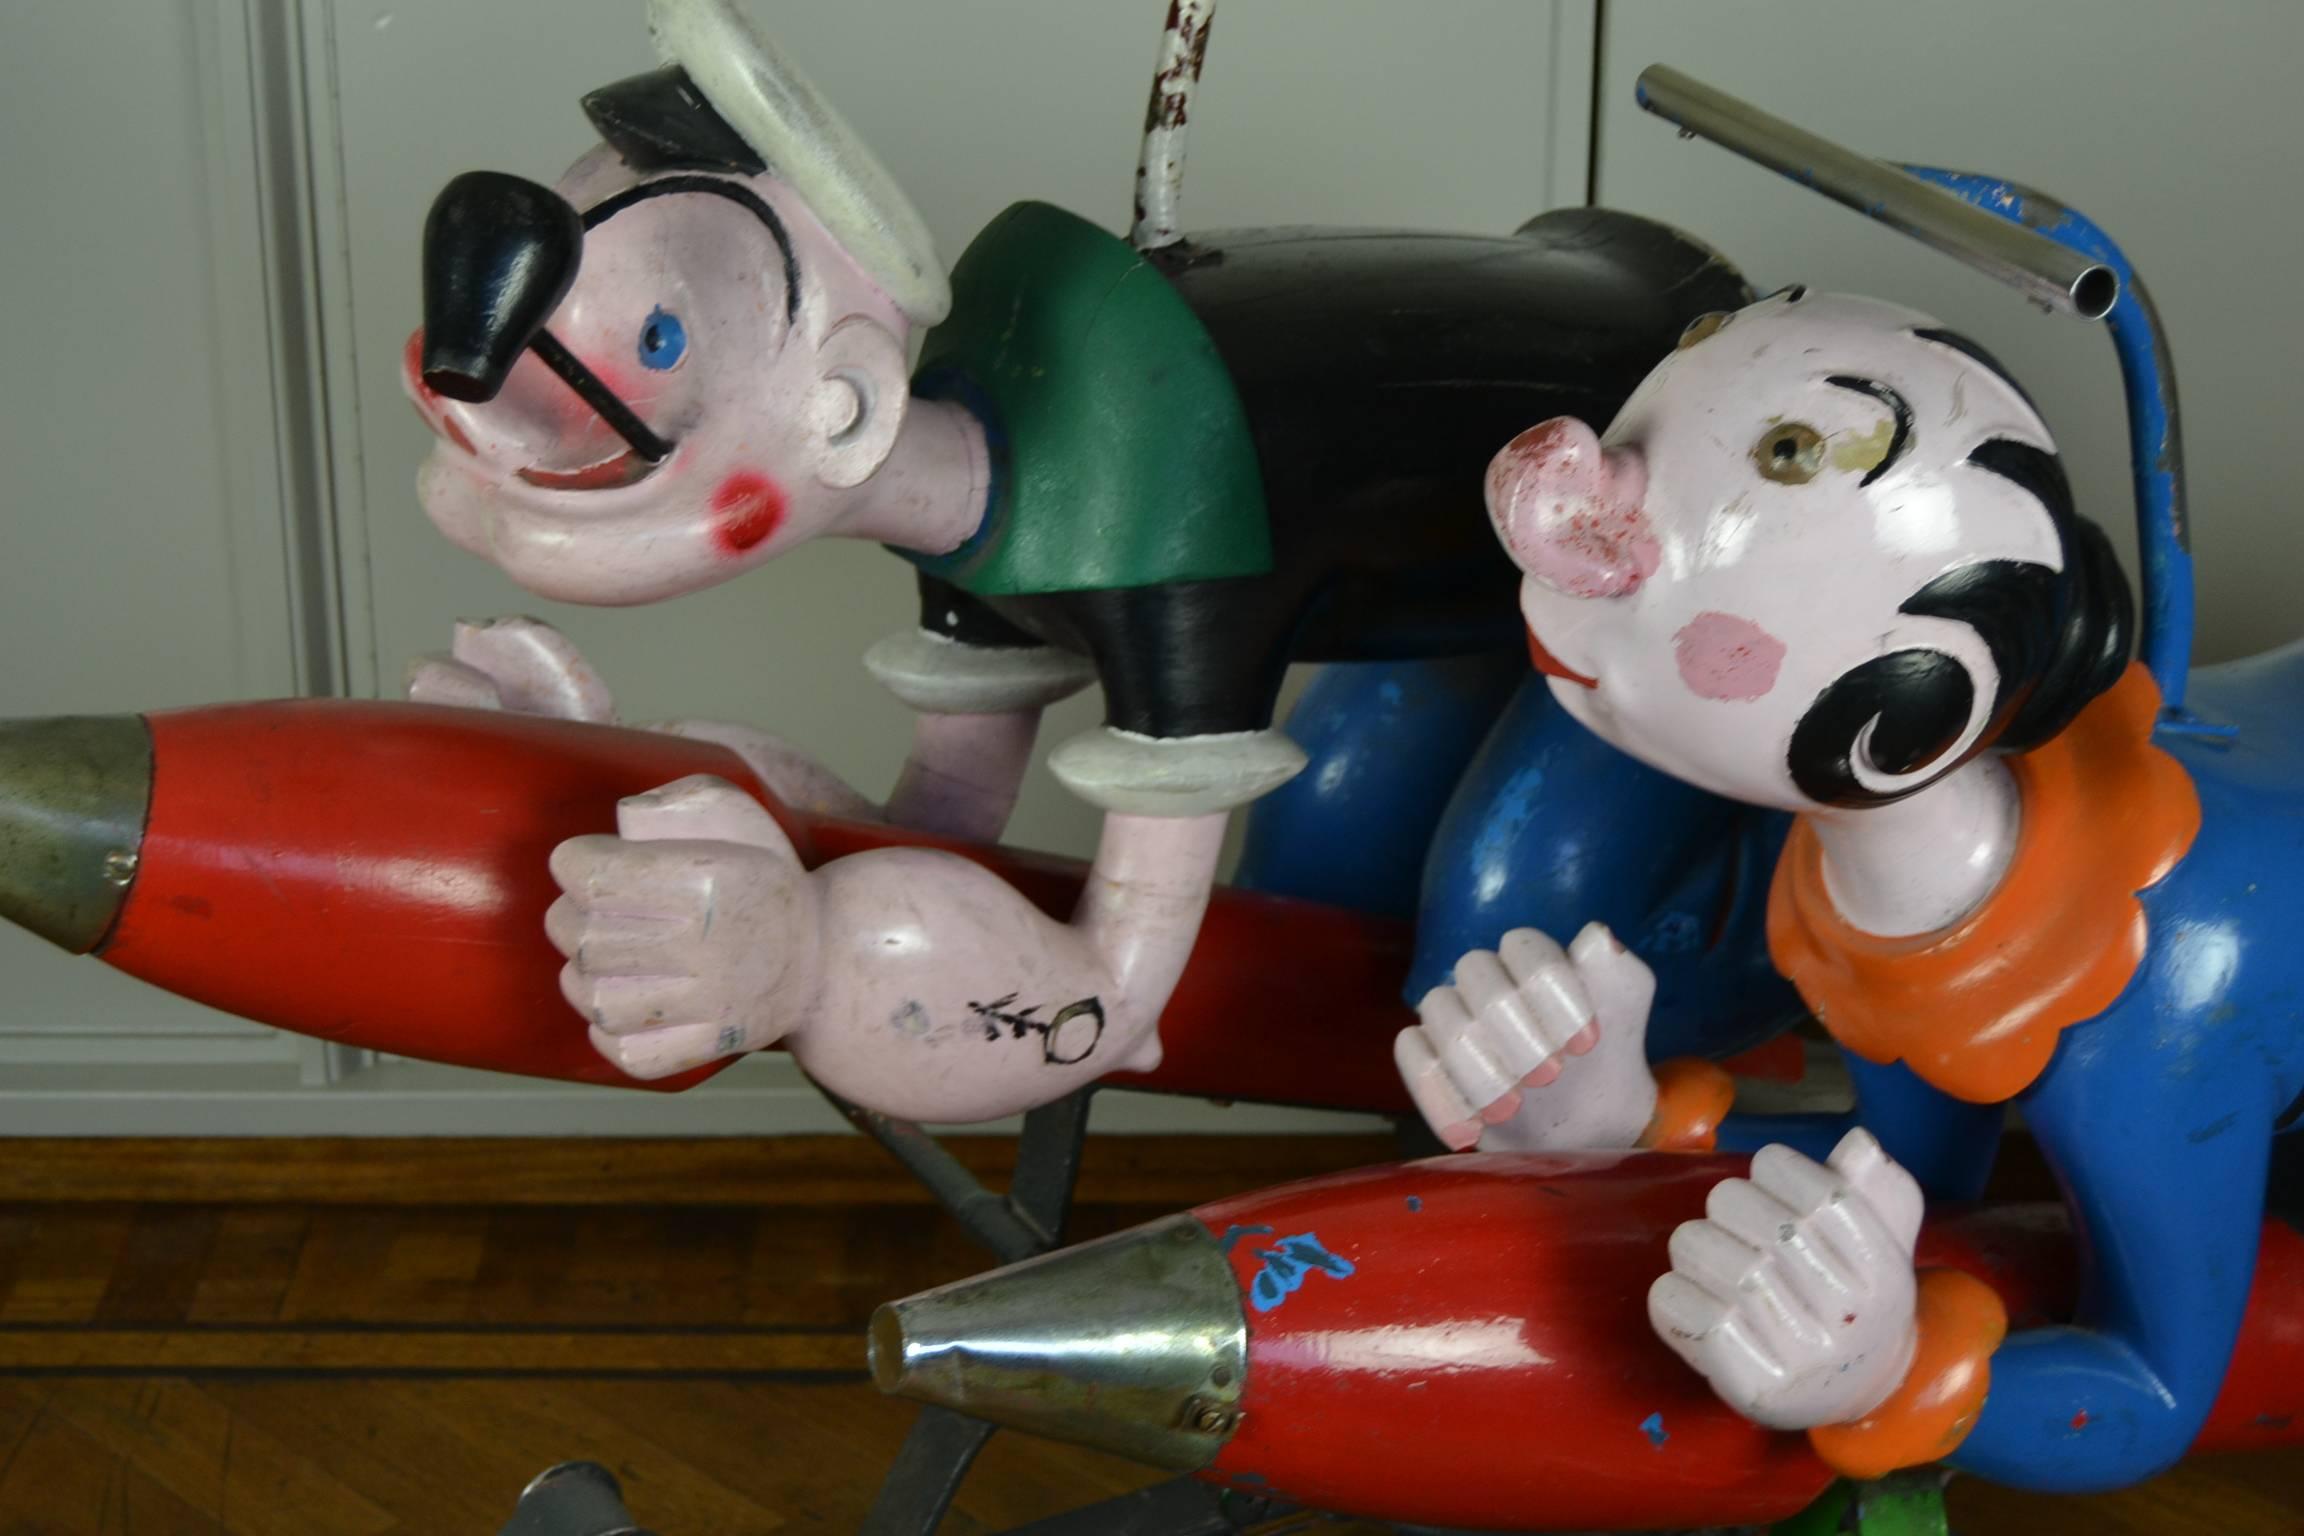 Popeye and olive Oyl carousel sculptures by Bernard Kindt.
This awesome couple of comic characters or animated cartoon characters are known worldwide and nostalgic for many among us.
